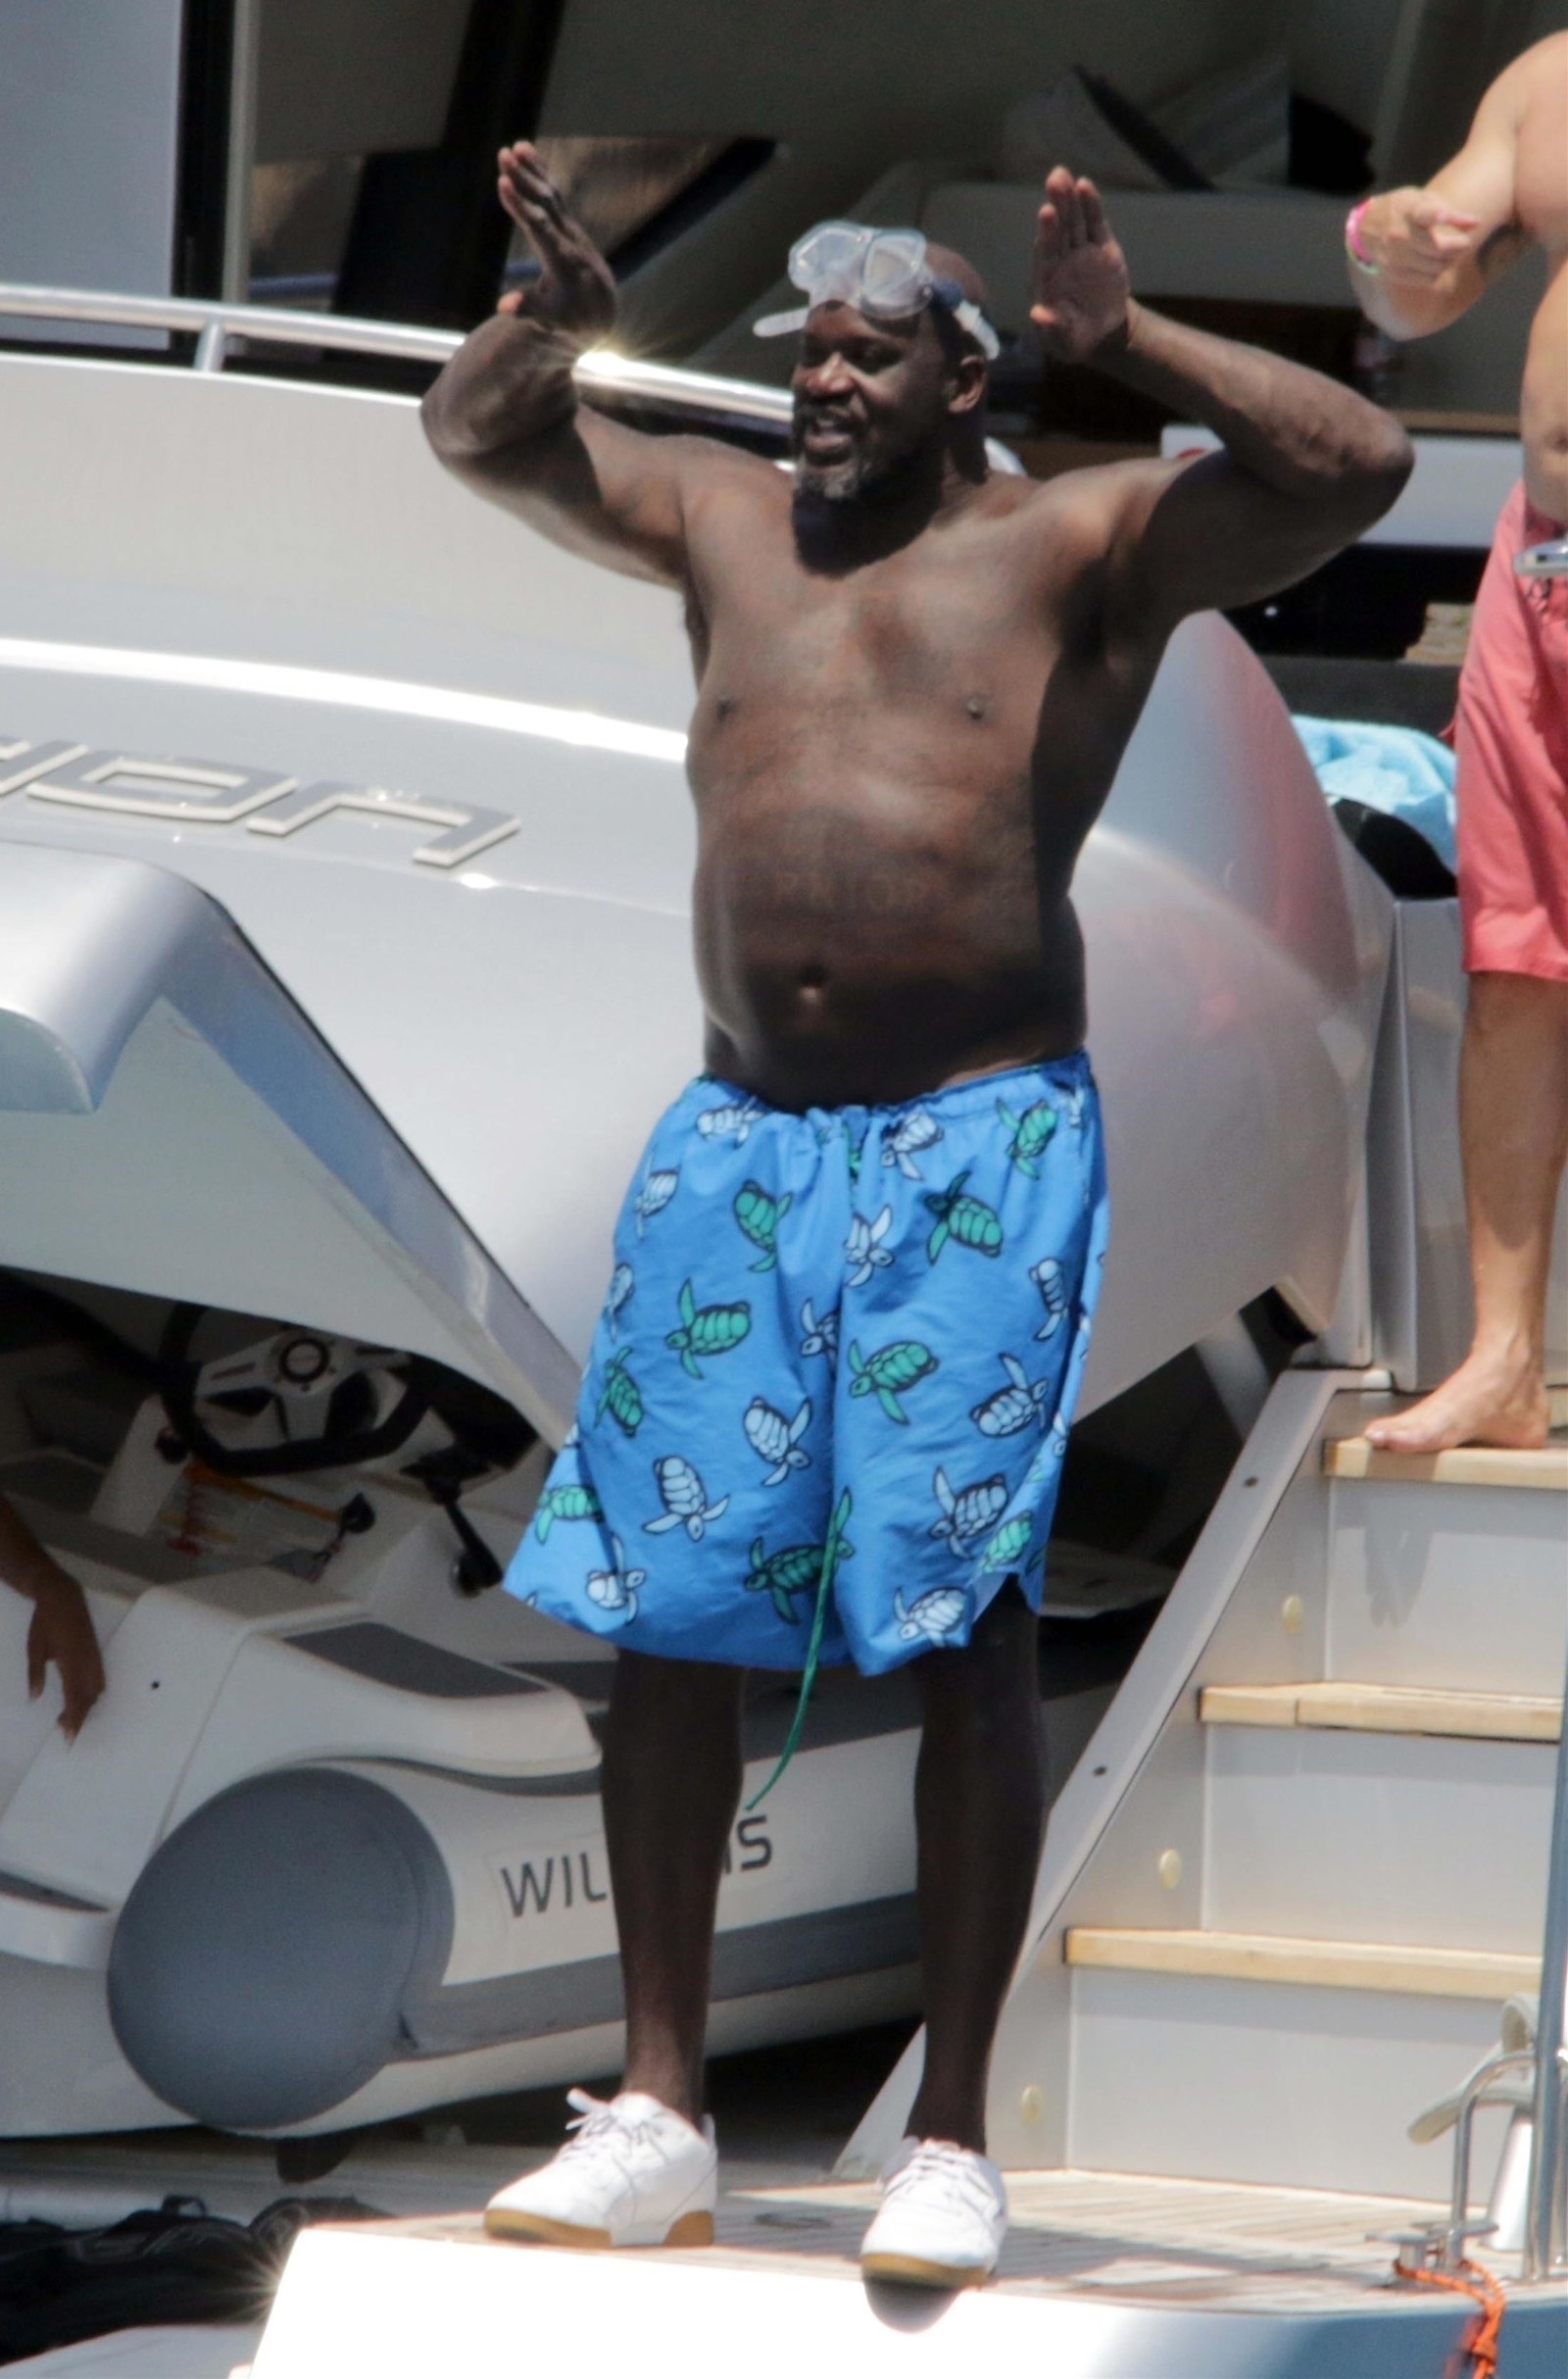 shaquille oneal shirtless